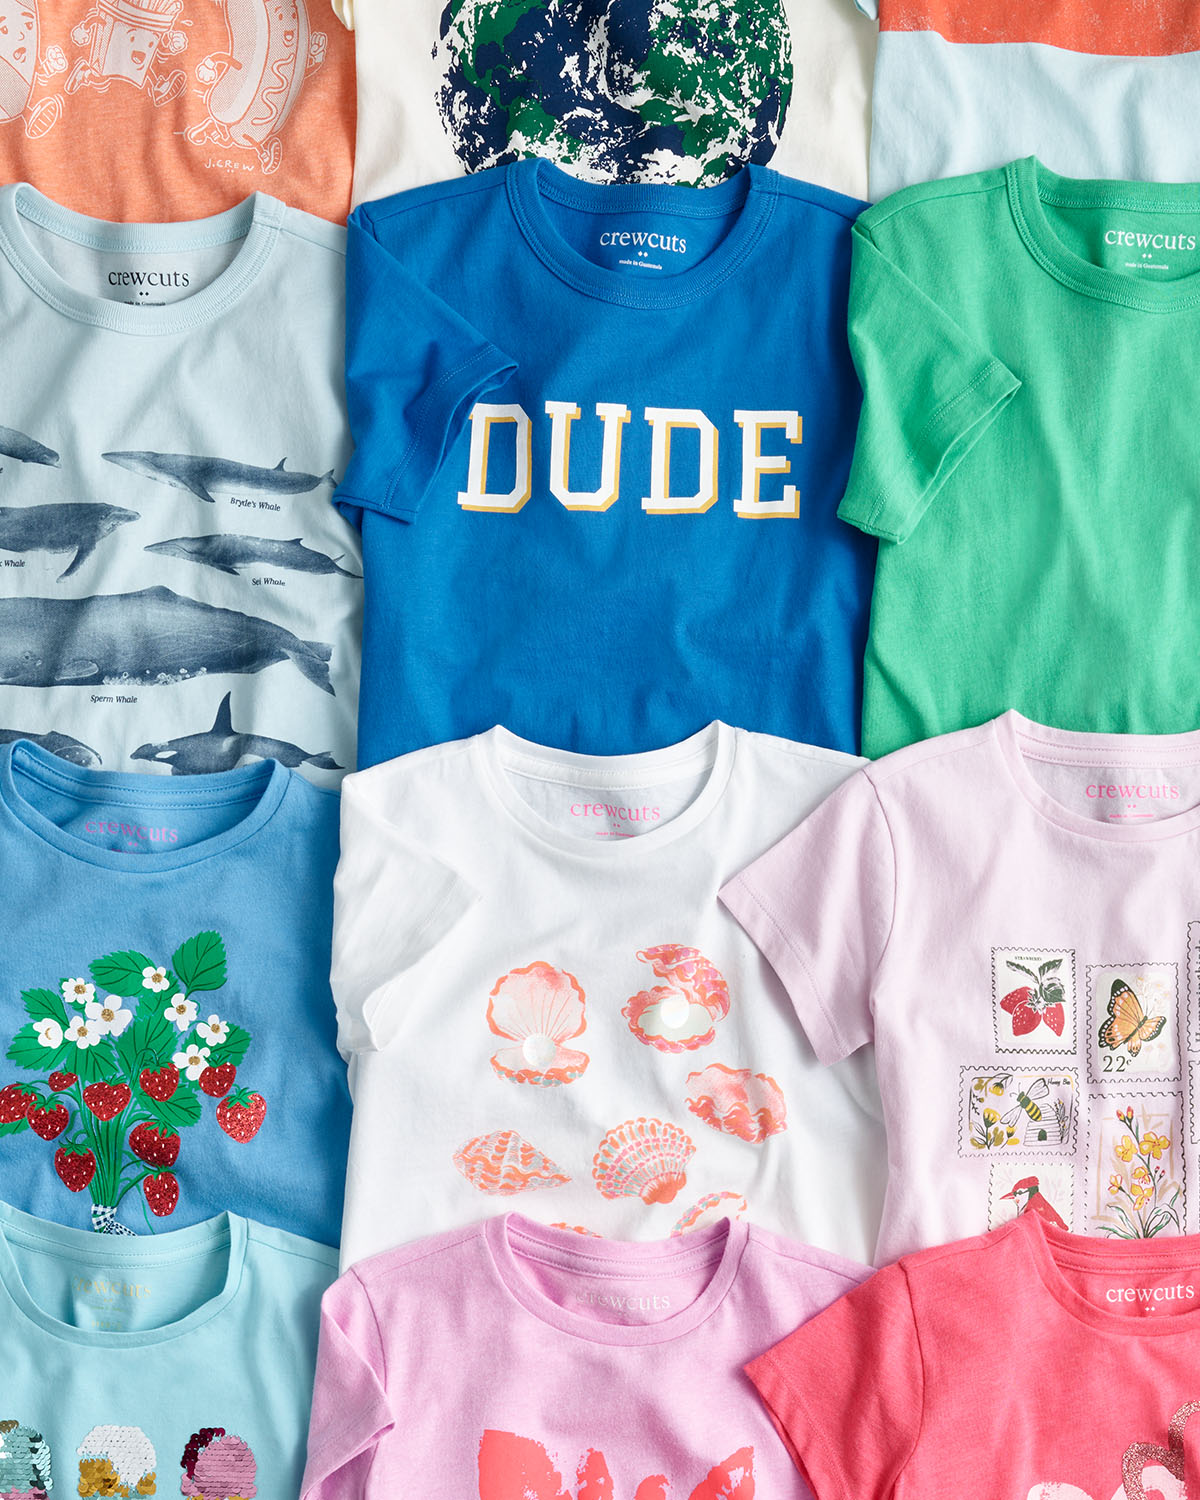 Lots (and lots!) of graphic tees